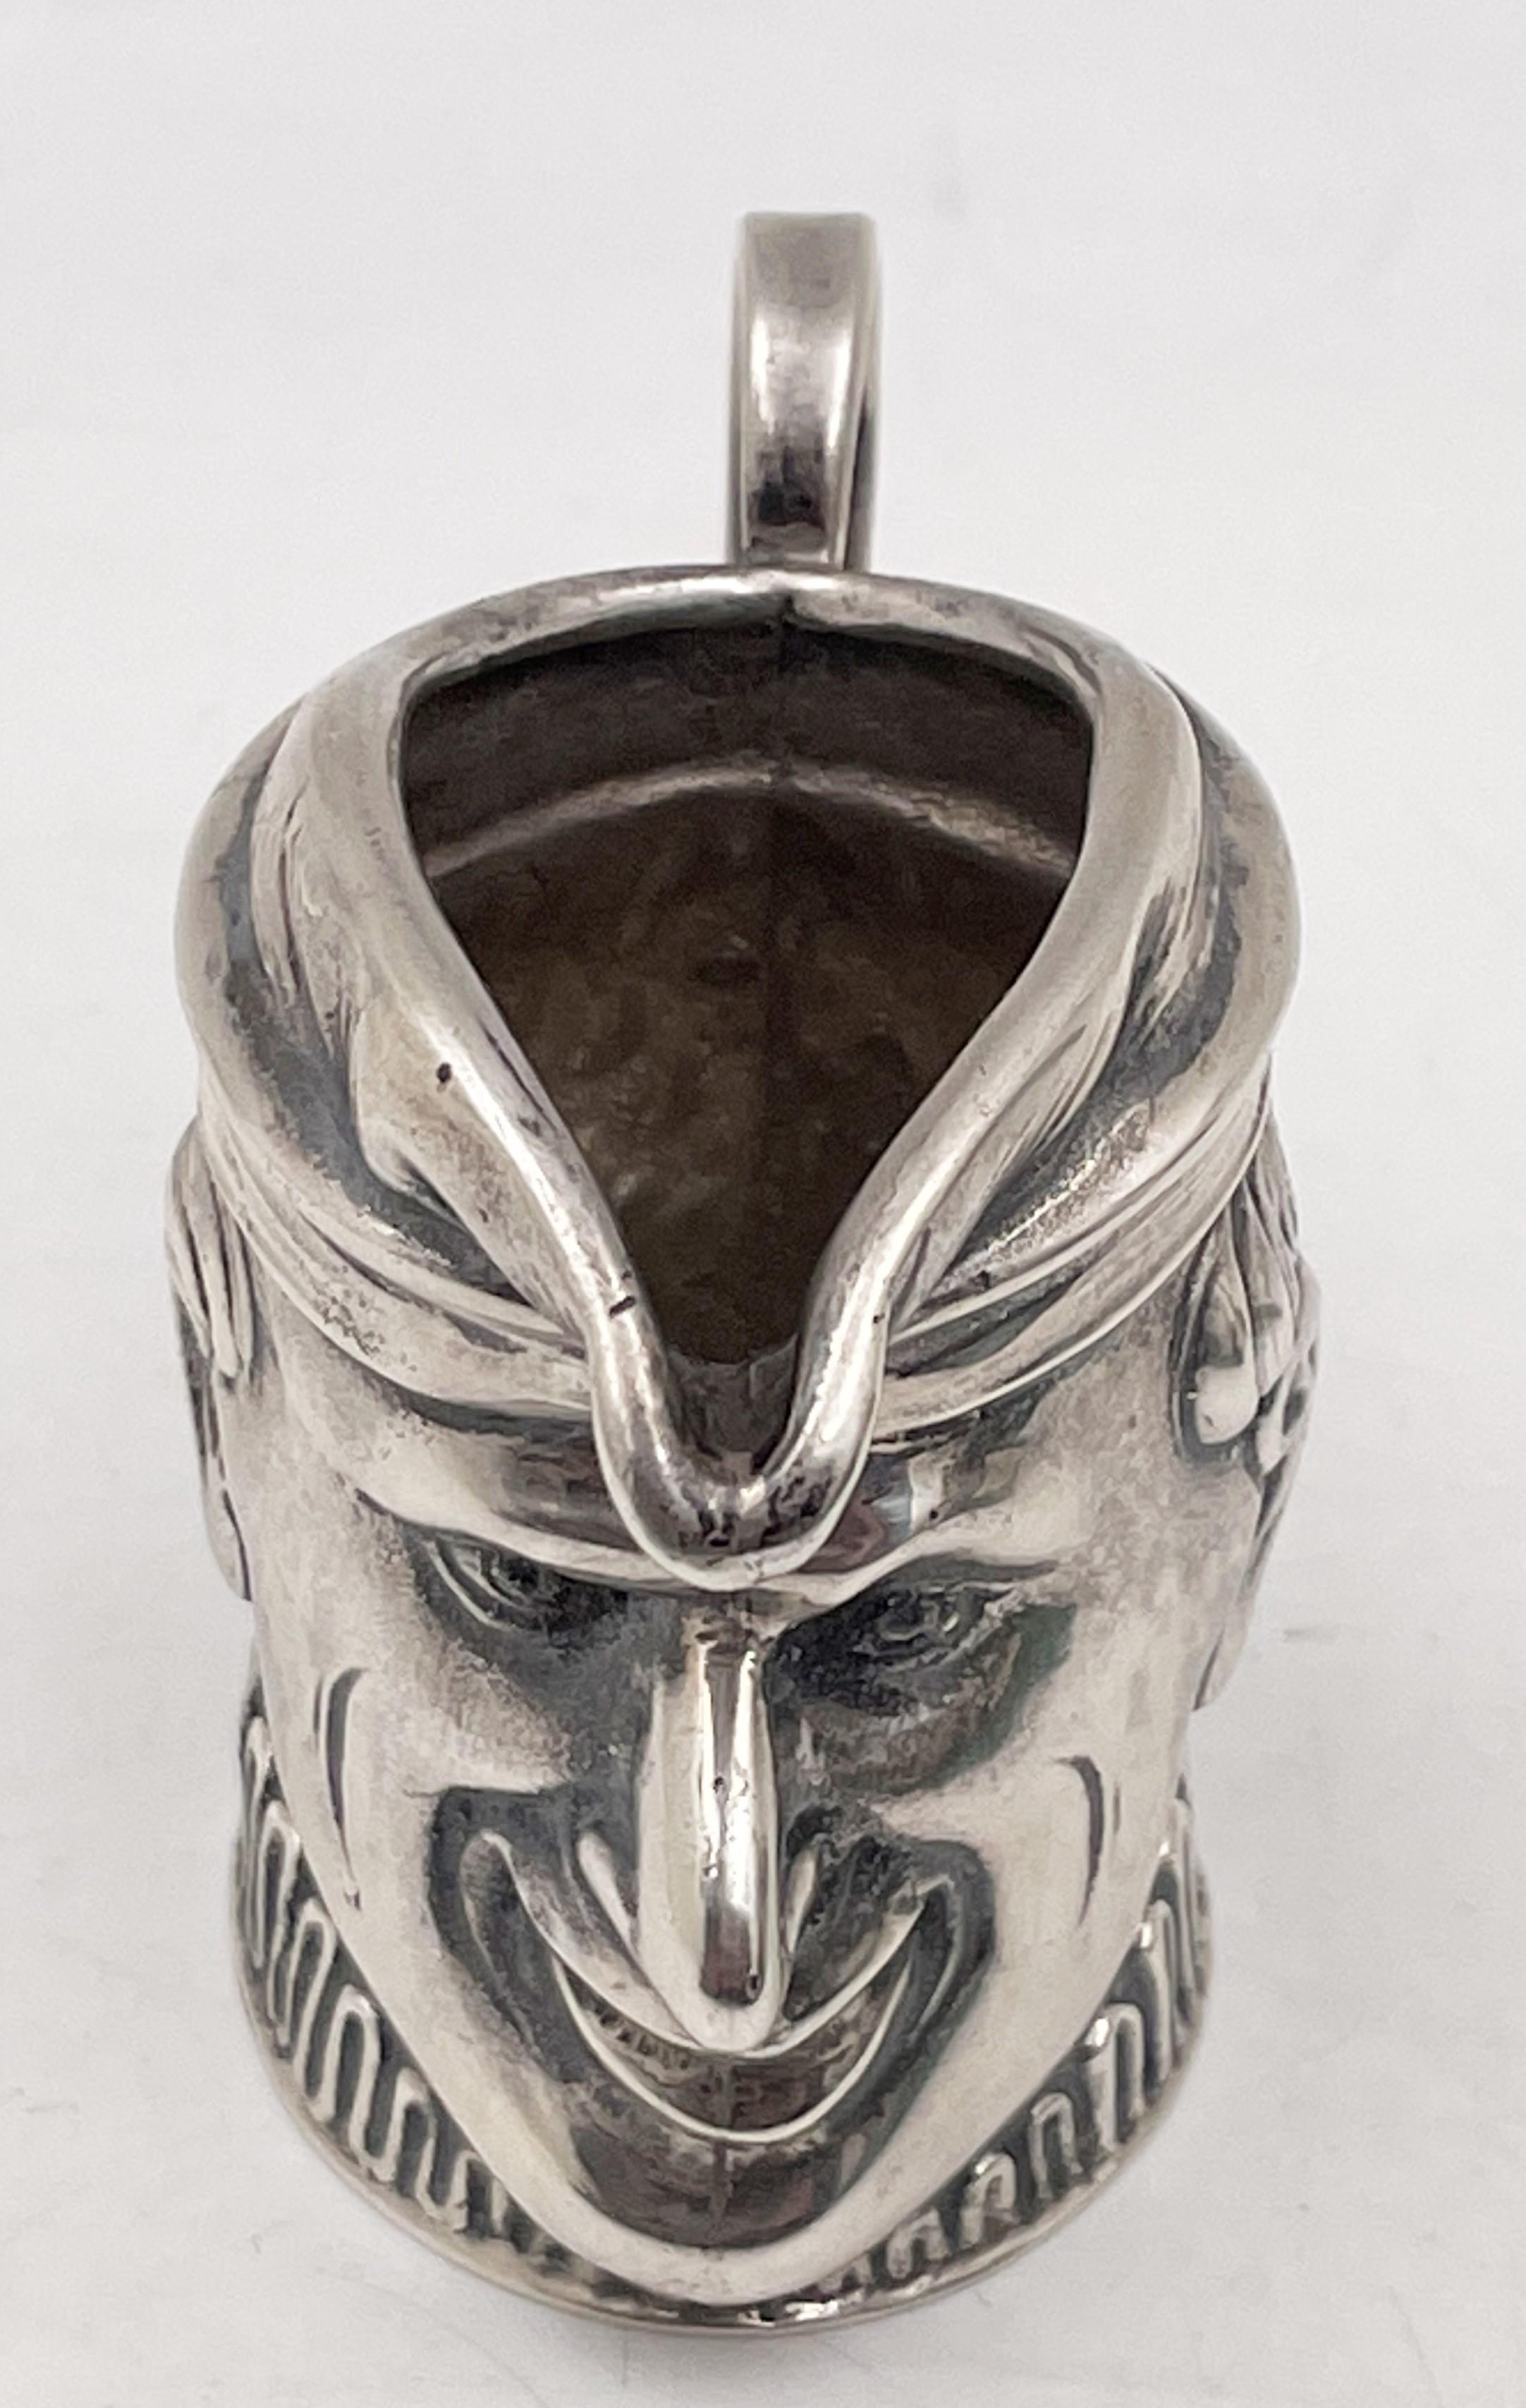 Toby jug / sterling silver creamer by New Orleans Silversmiths depicting a well-executed, human face with a long nose, measuring 2 1/8'' in height by 2 3/4'' from handle to spout, and bearing hallmarks as shown. 

We hand polish all items before